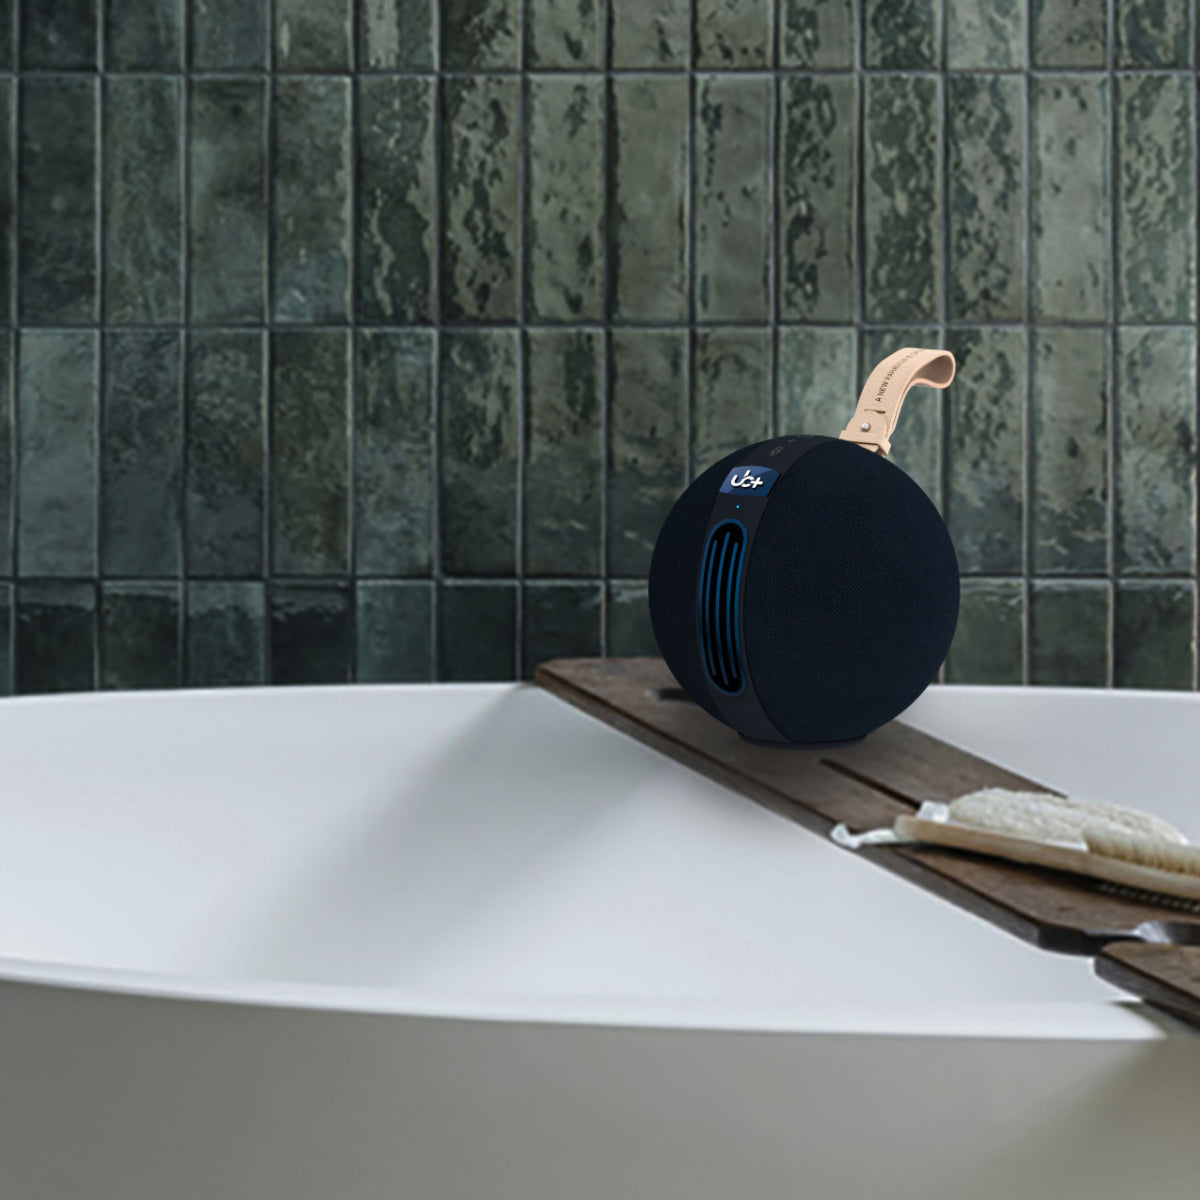 S1 Circle UB+ Bluetooth circle speaker in a bathroom highlighting its water resistant design